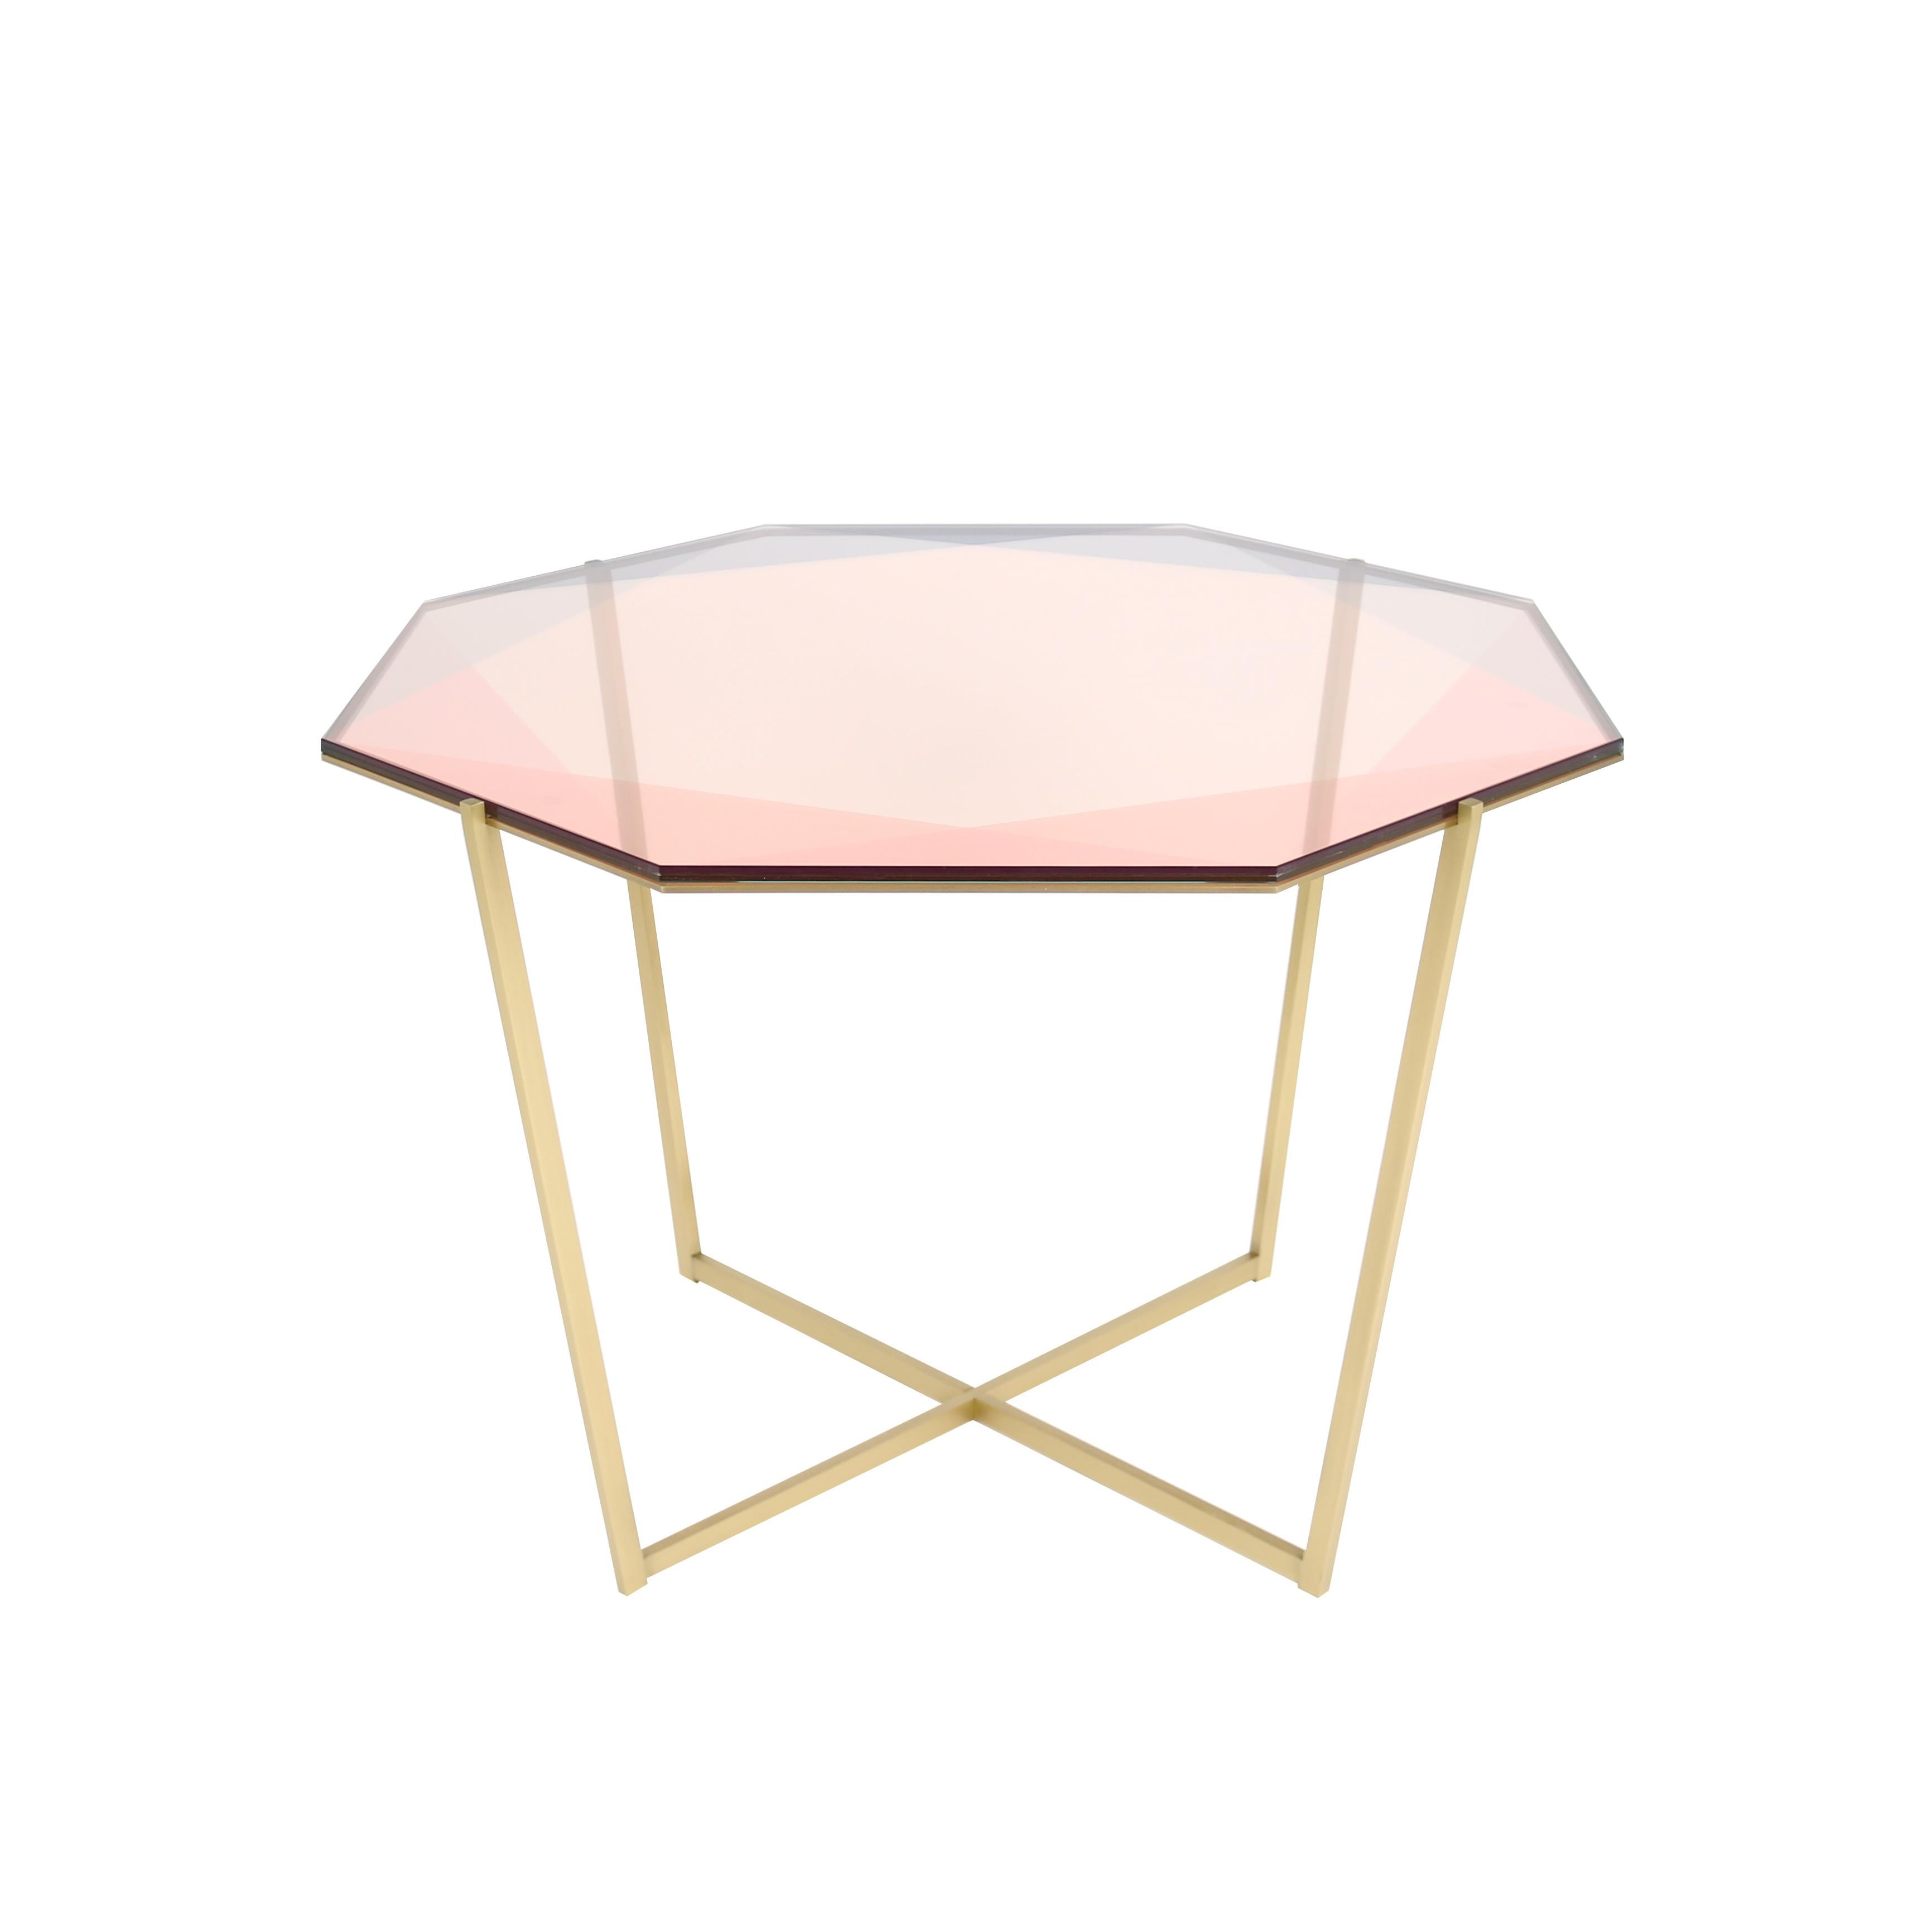 Gem Octagonal Dining Table / Entry Table-Blush Glass w/ Brass Base by Debra Folz For Sale